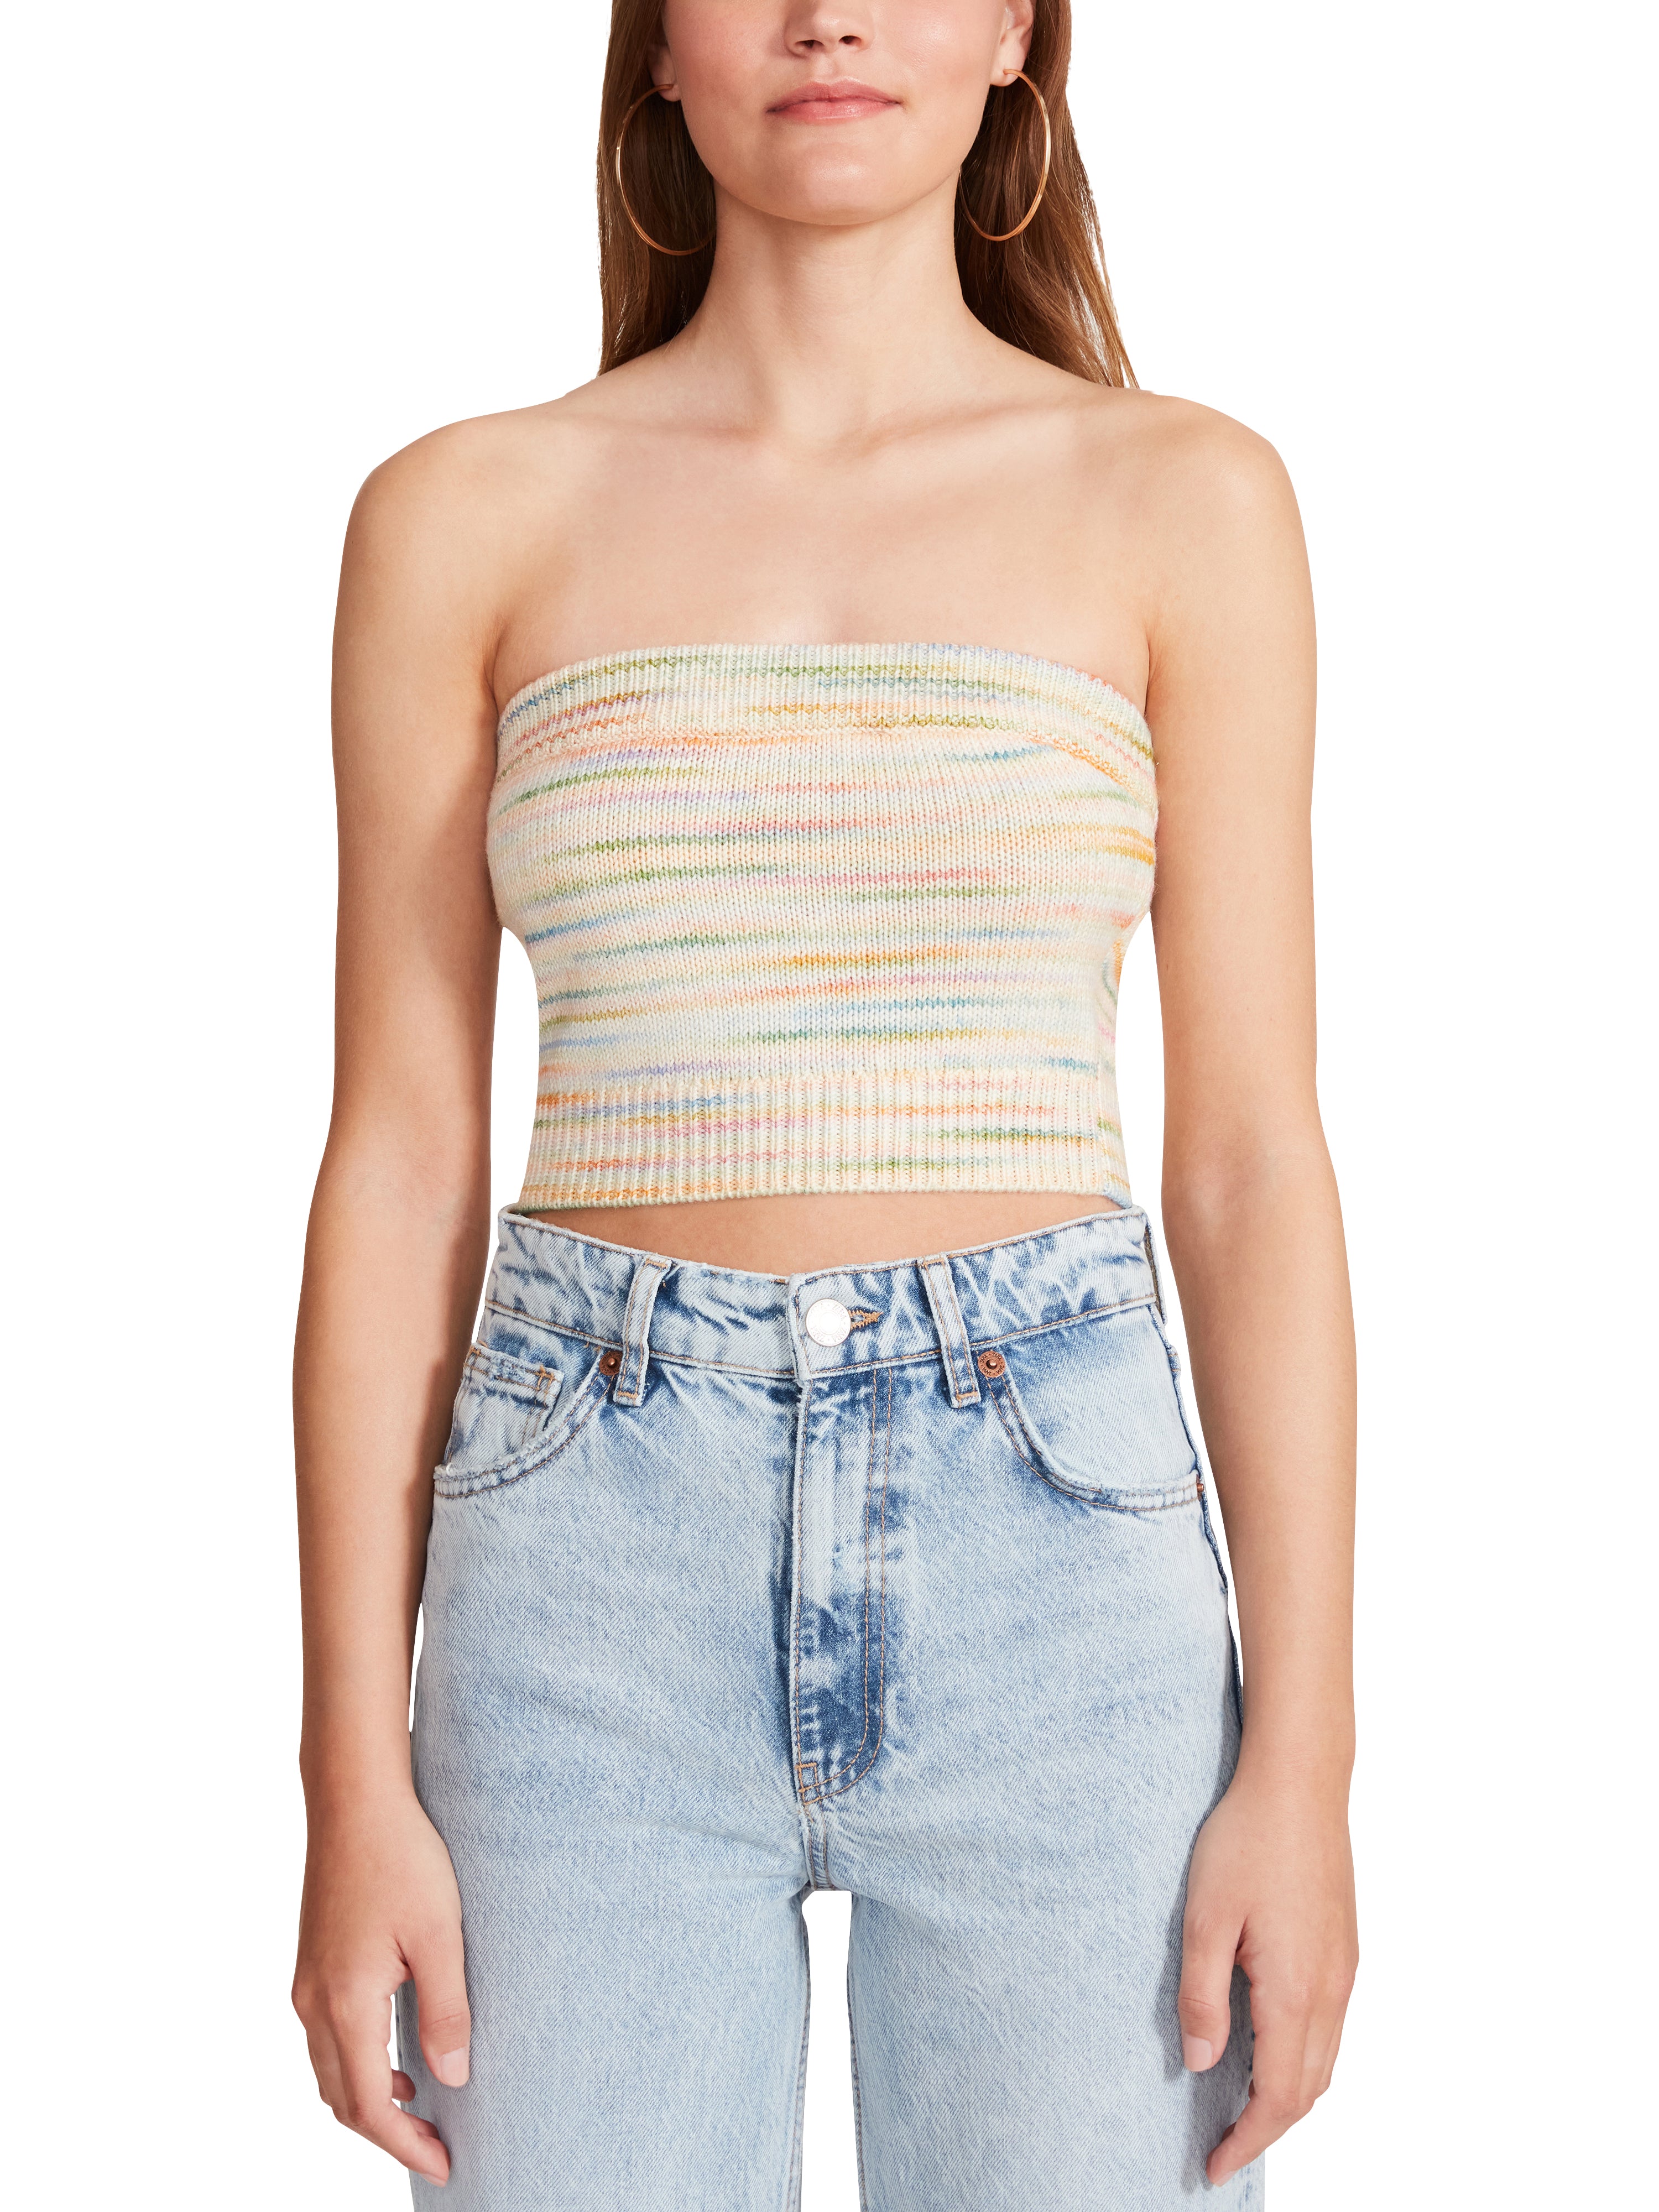 Steady Space Tube Top